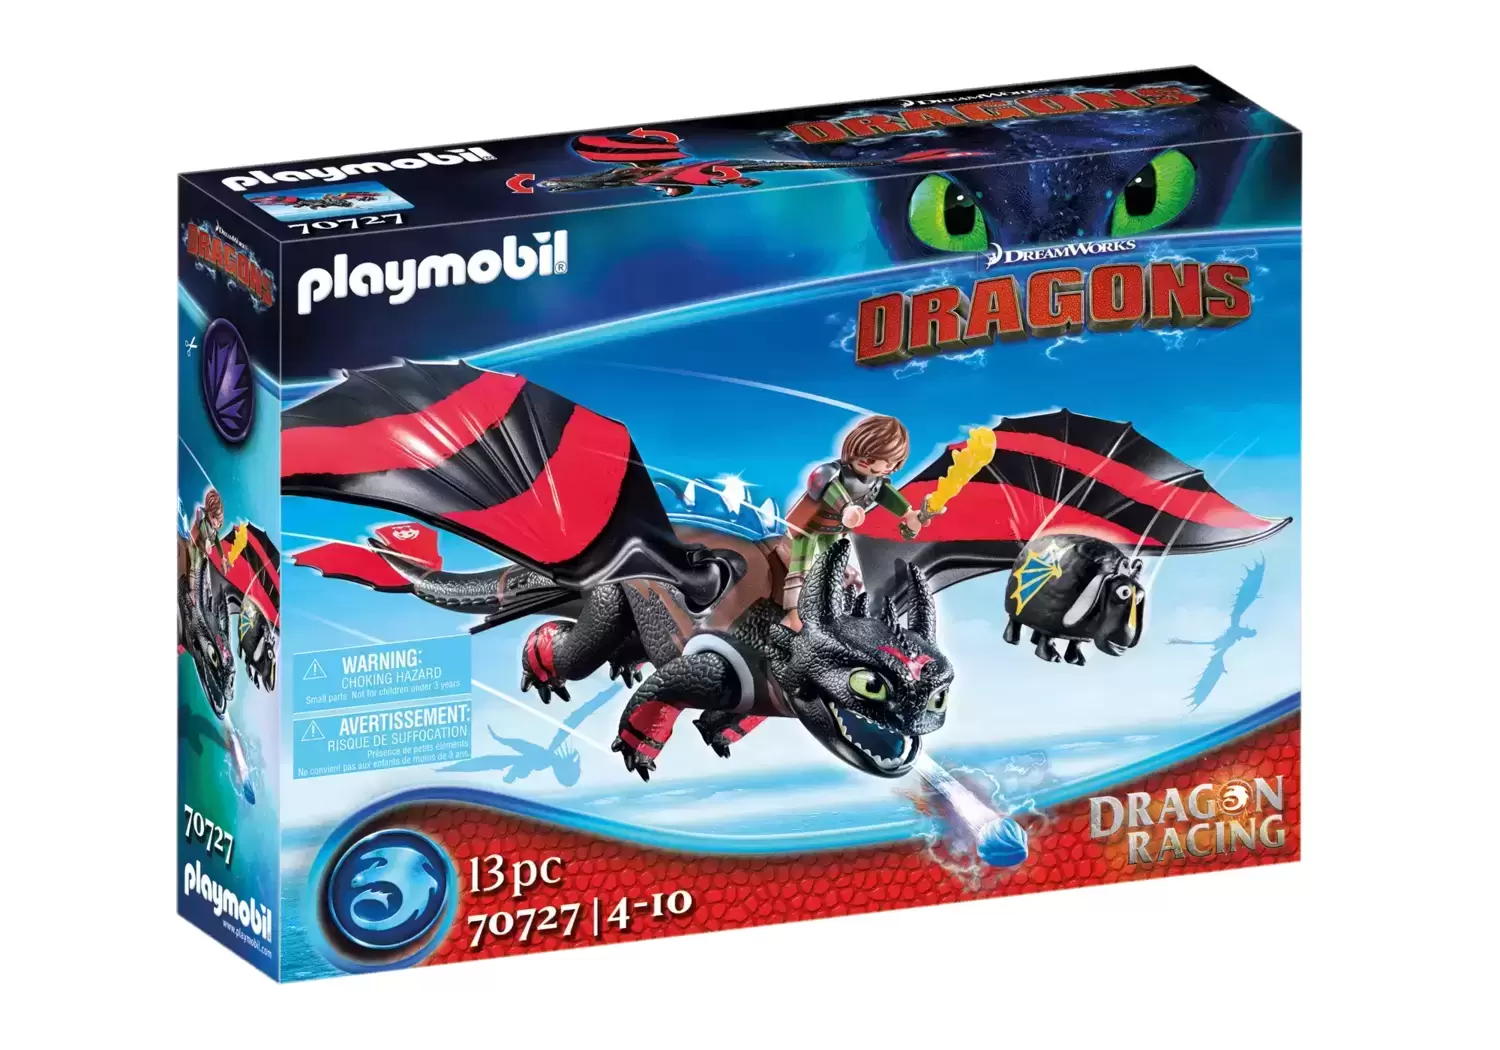 Playmobil Dragons Movie - Dragon Racing - Toothless & Hiccup